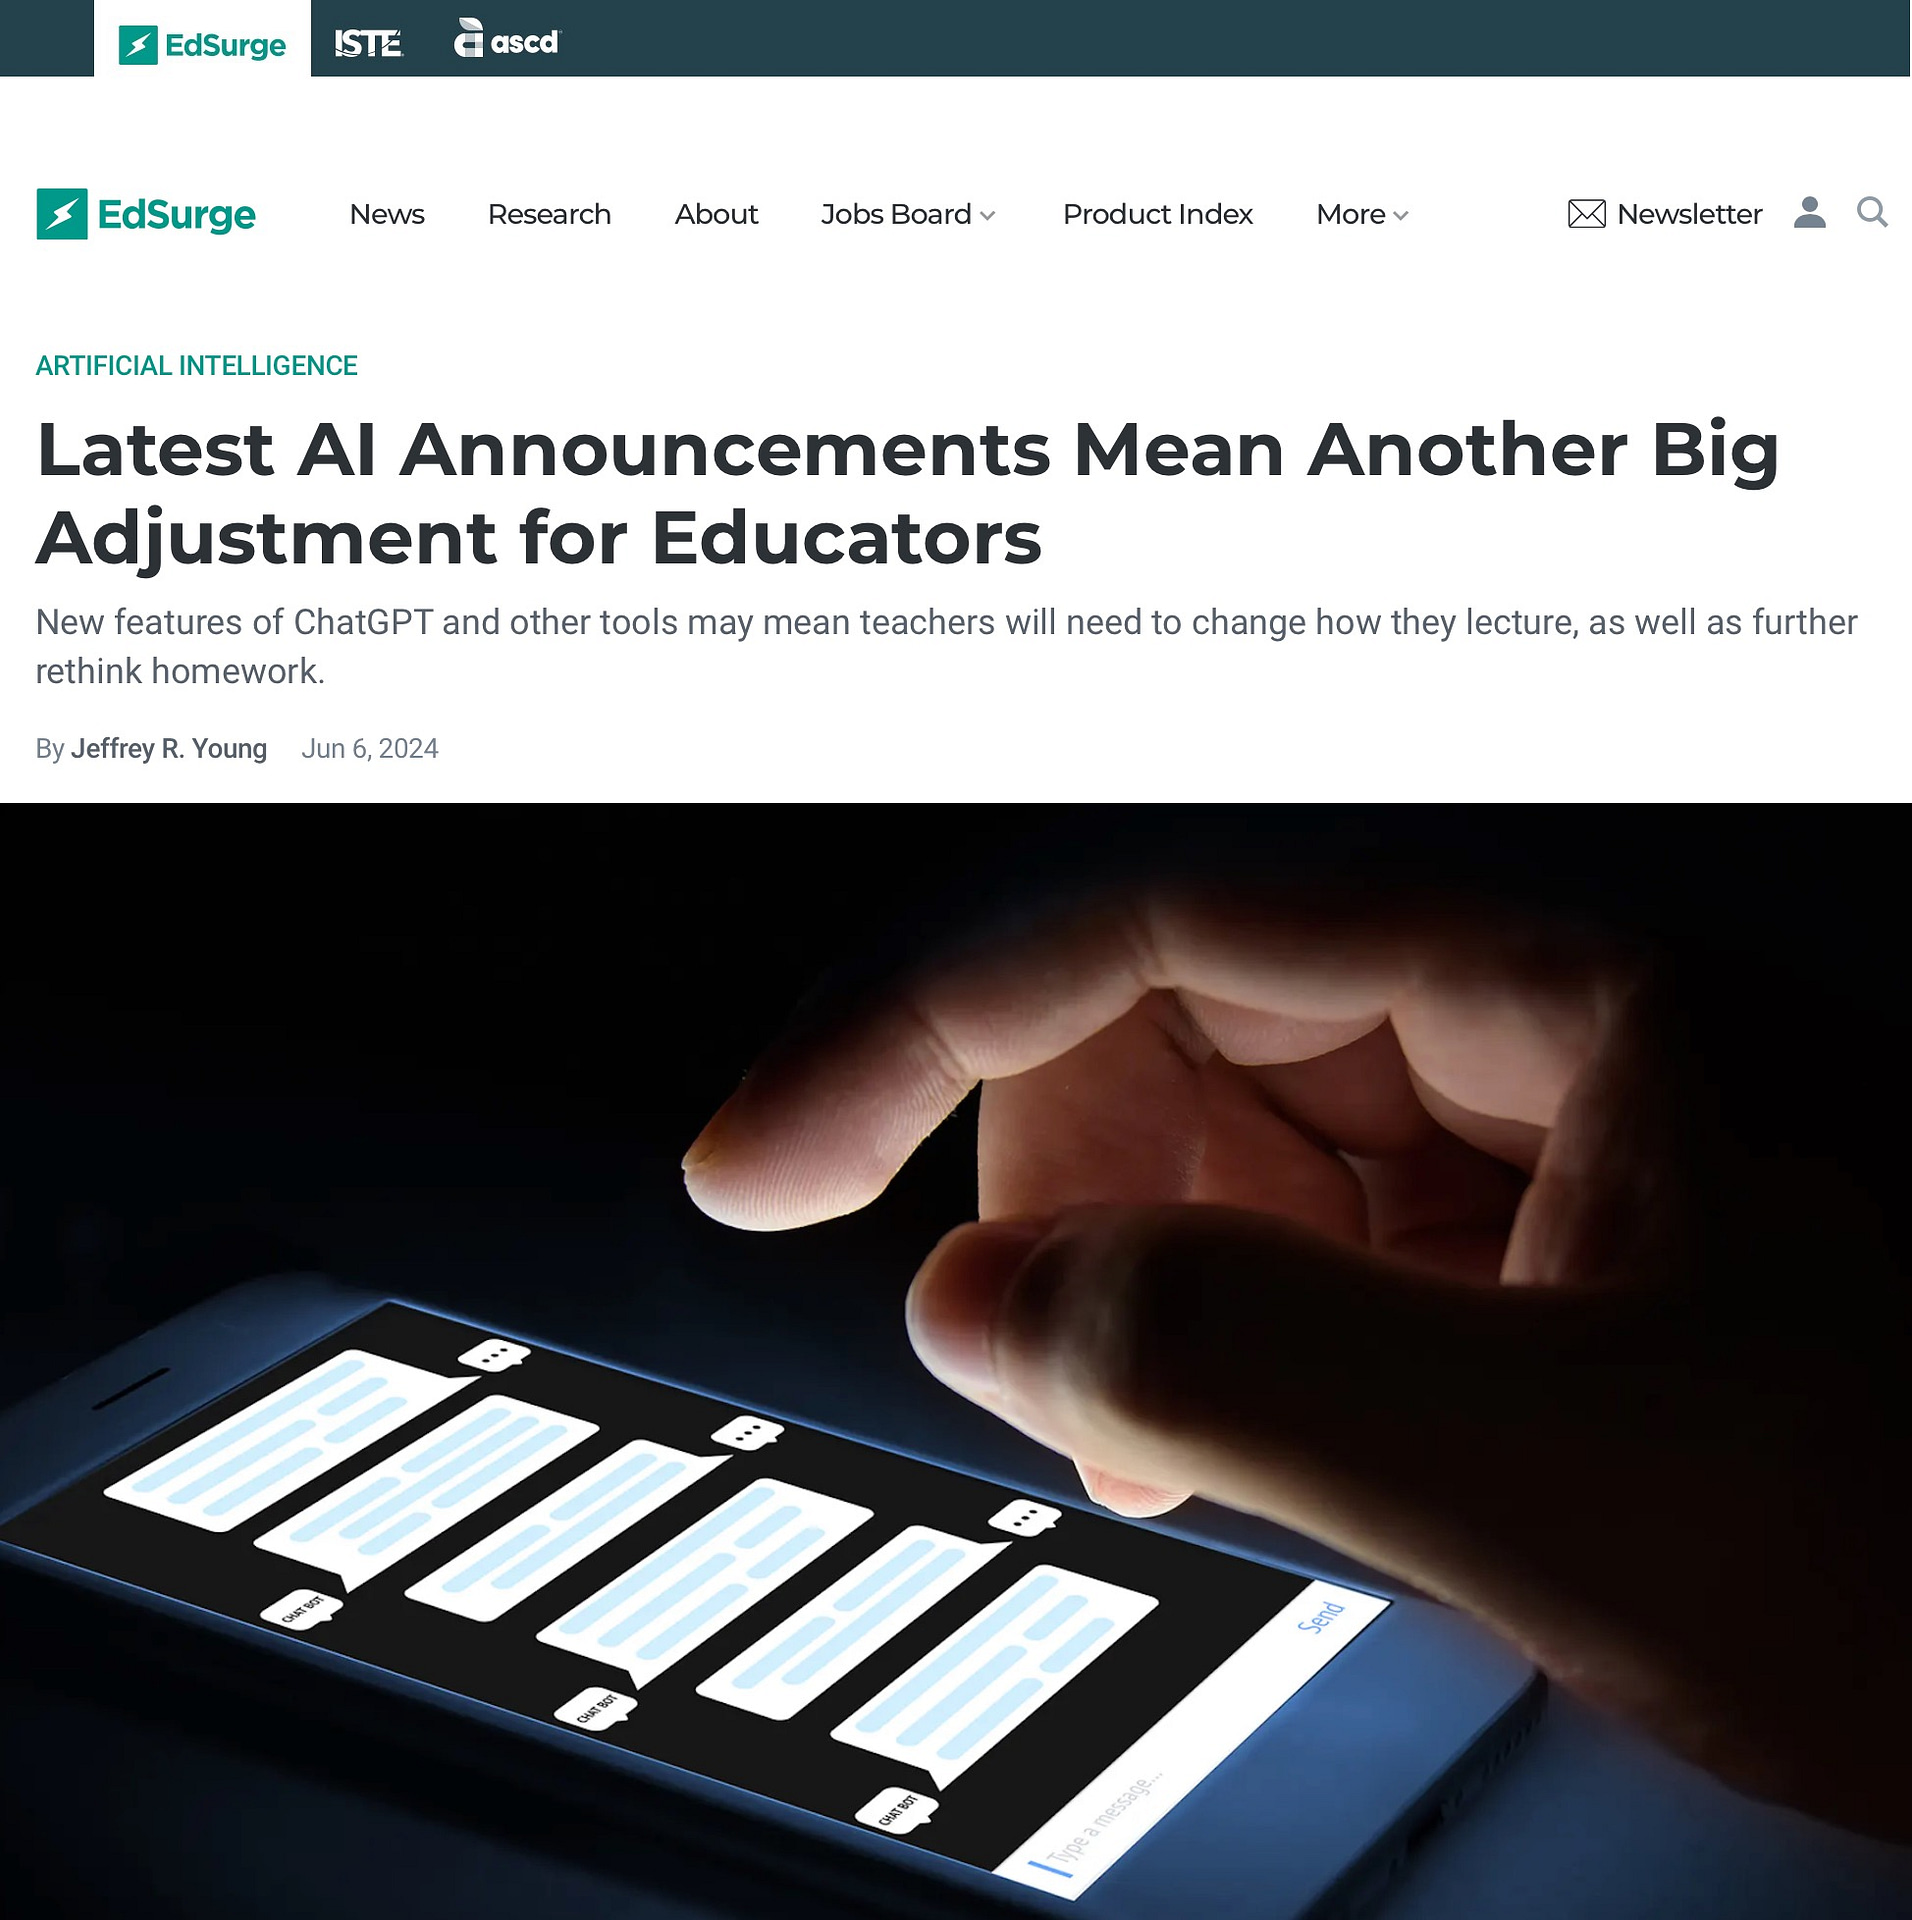 Latest AI Announcements Mean Another Big Adjustment for Educators